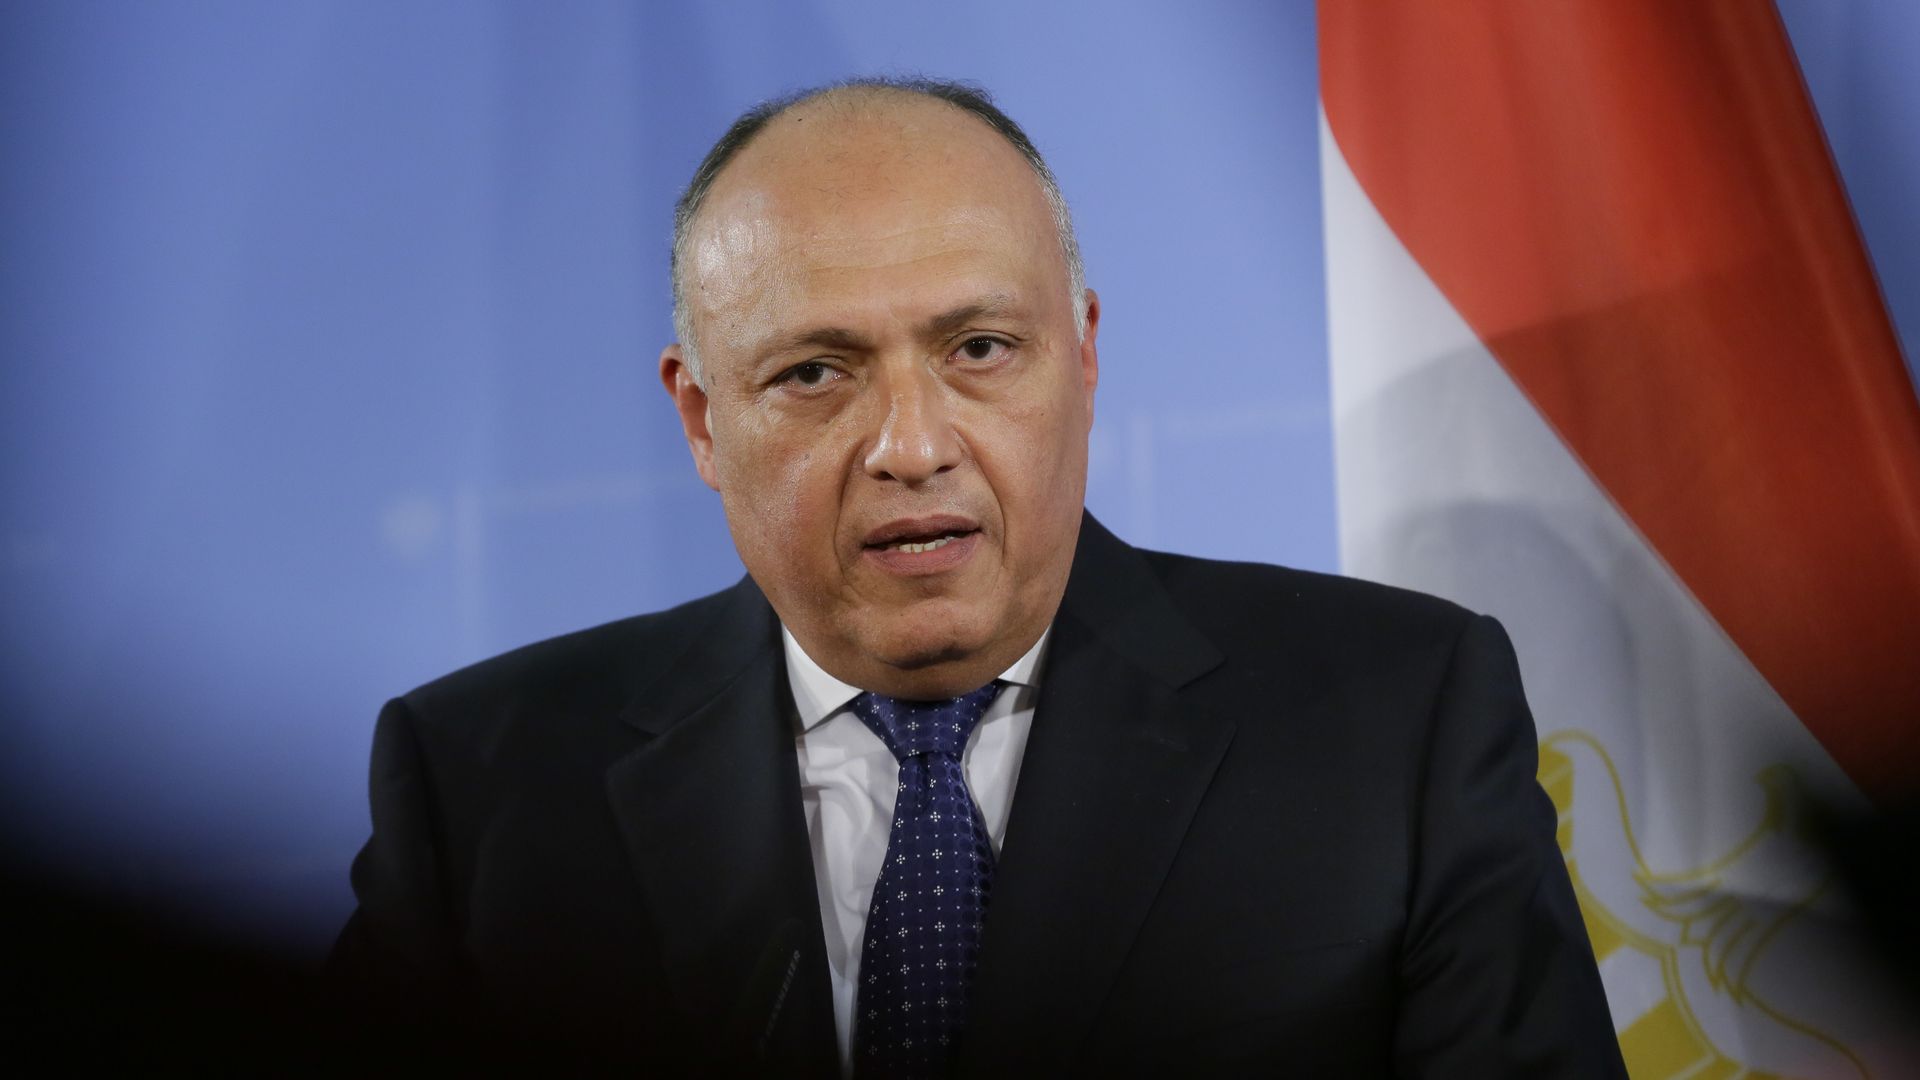  Sameh Shoukry, Foreign Minister of Egypt on January 13, 2016 in Berlin, Germany. 